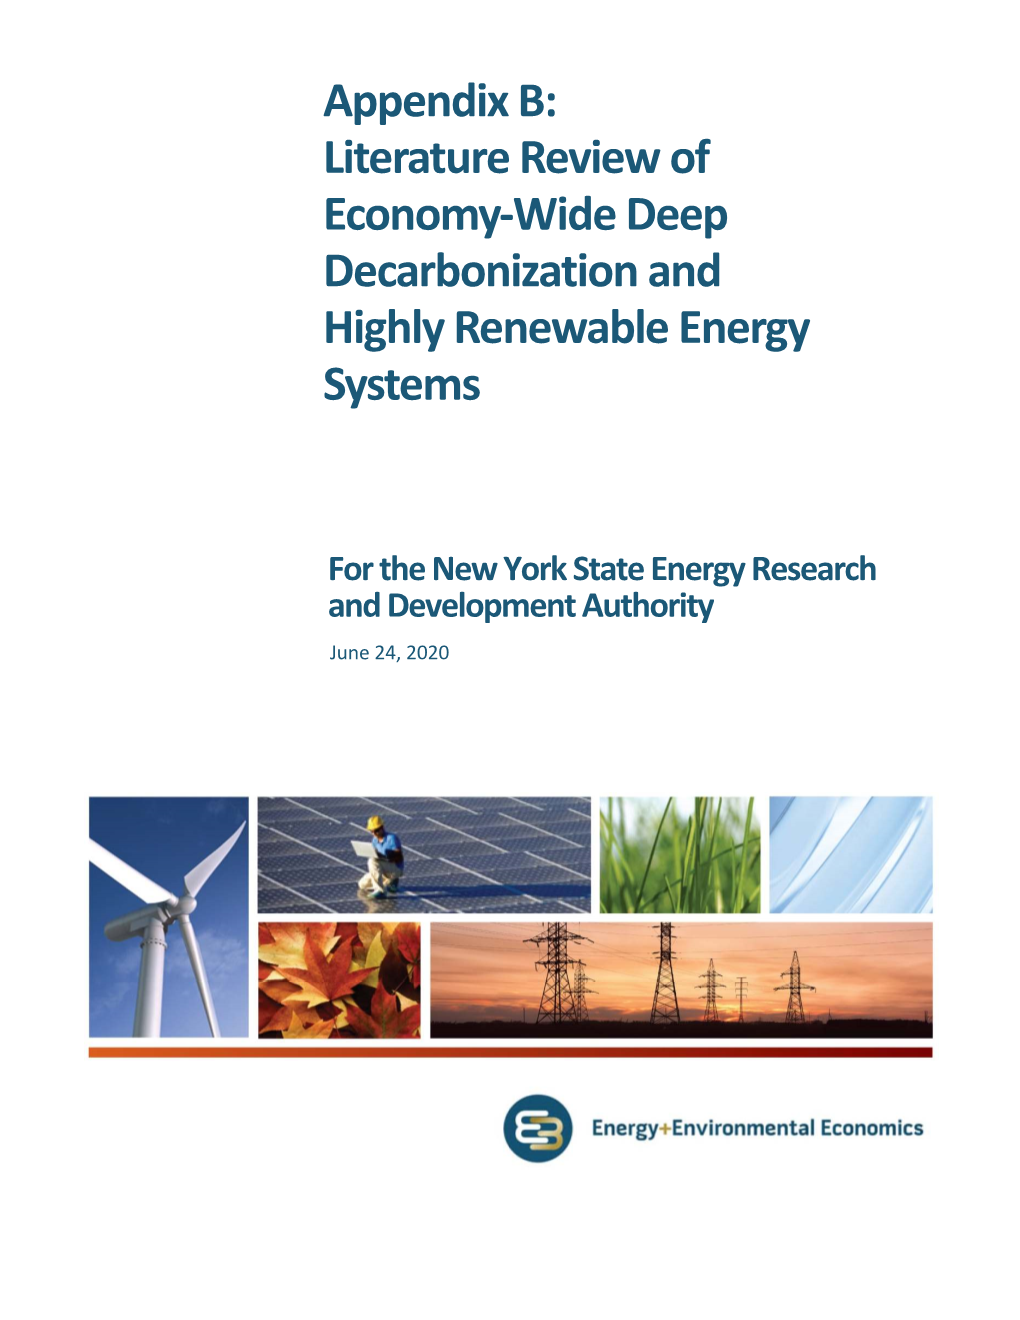 Literature Review of Economy-Wide Deep Decarbonization and Highly Renewable Energy Systems